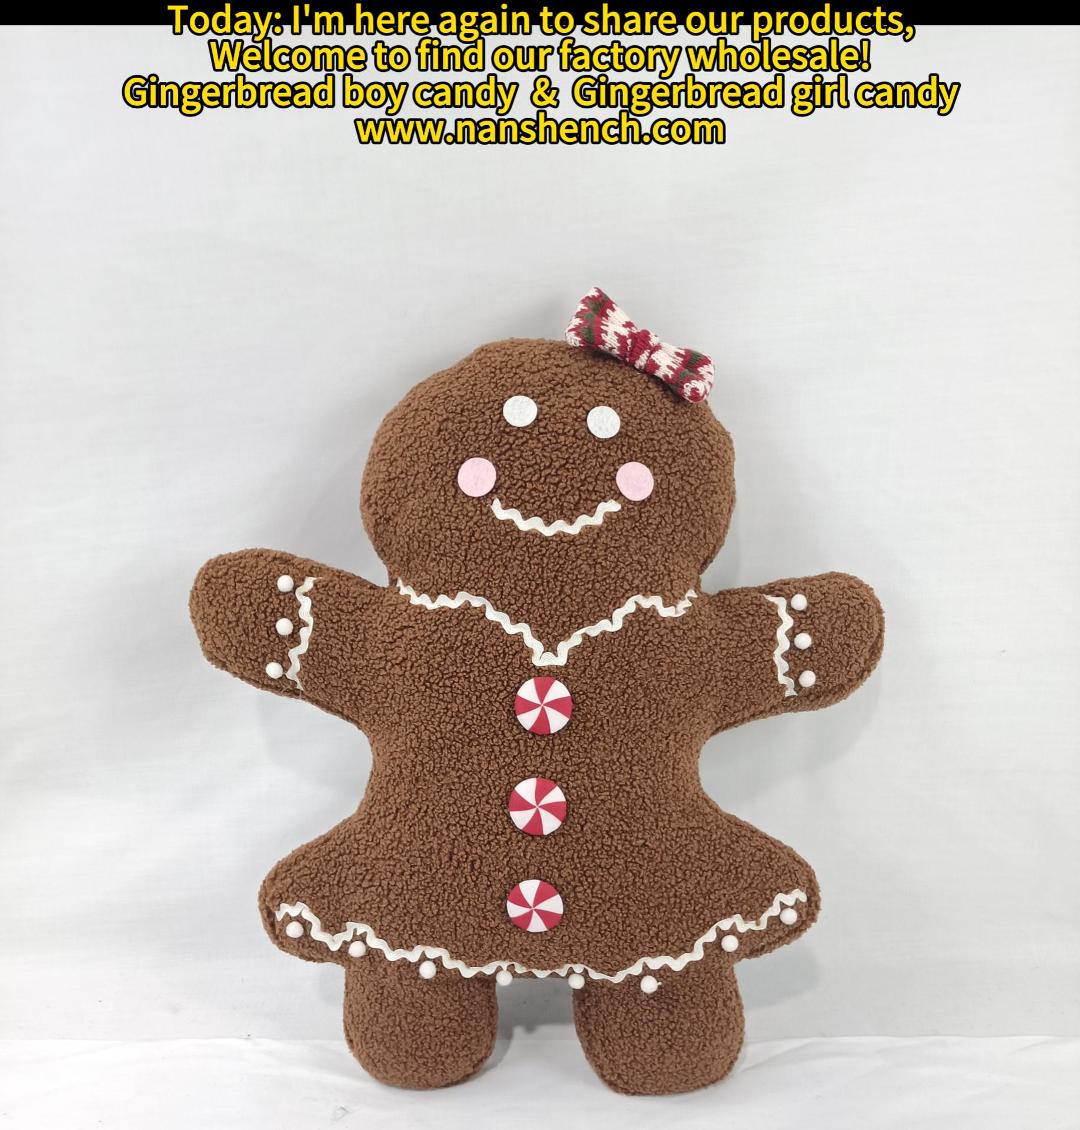 Get Festive with Collectible Gingerbread Boy and Girl Decorations!